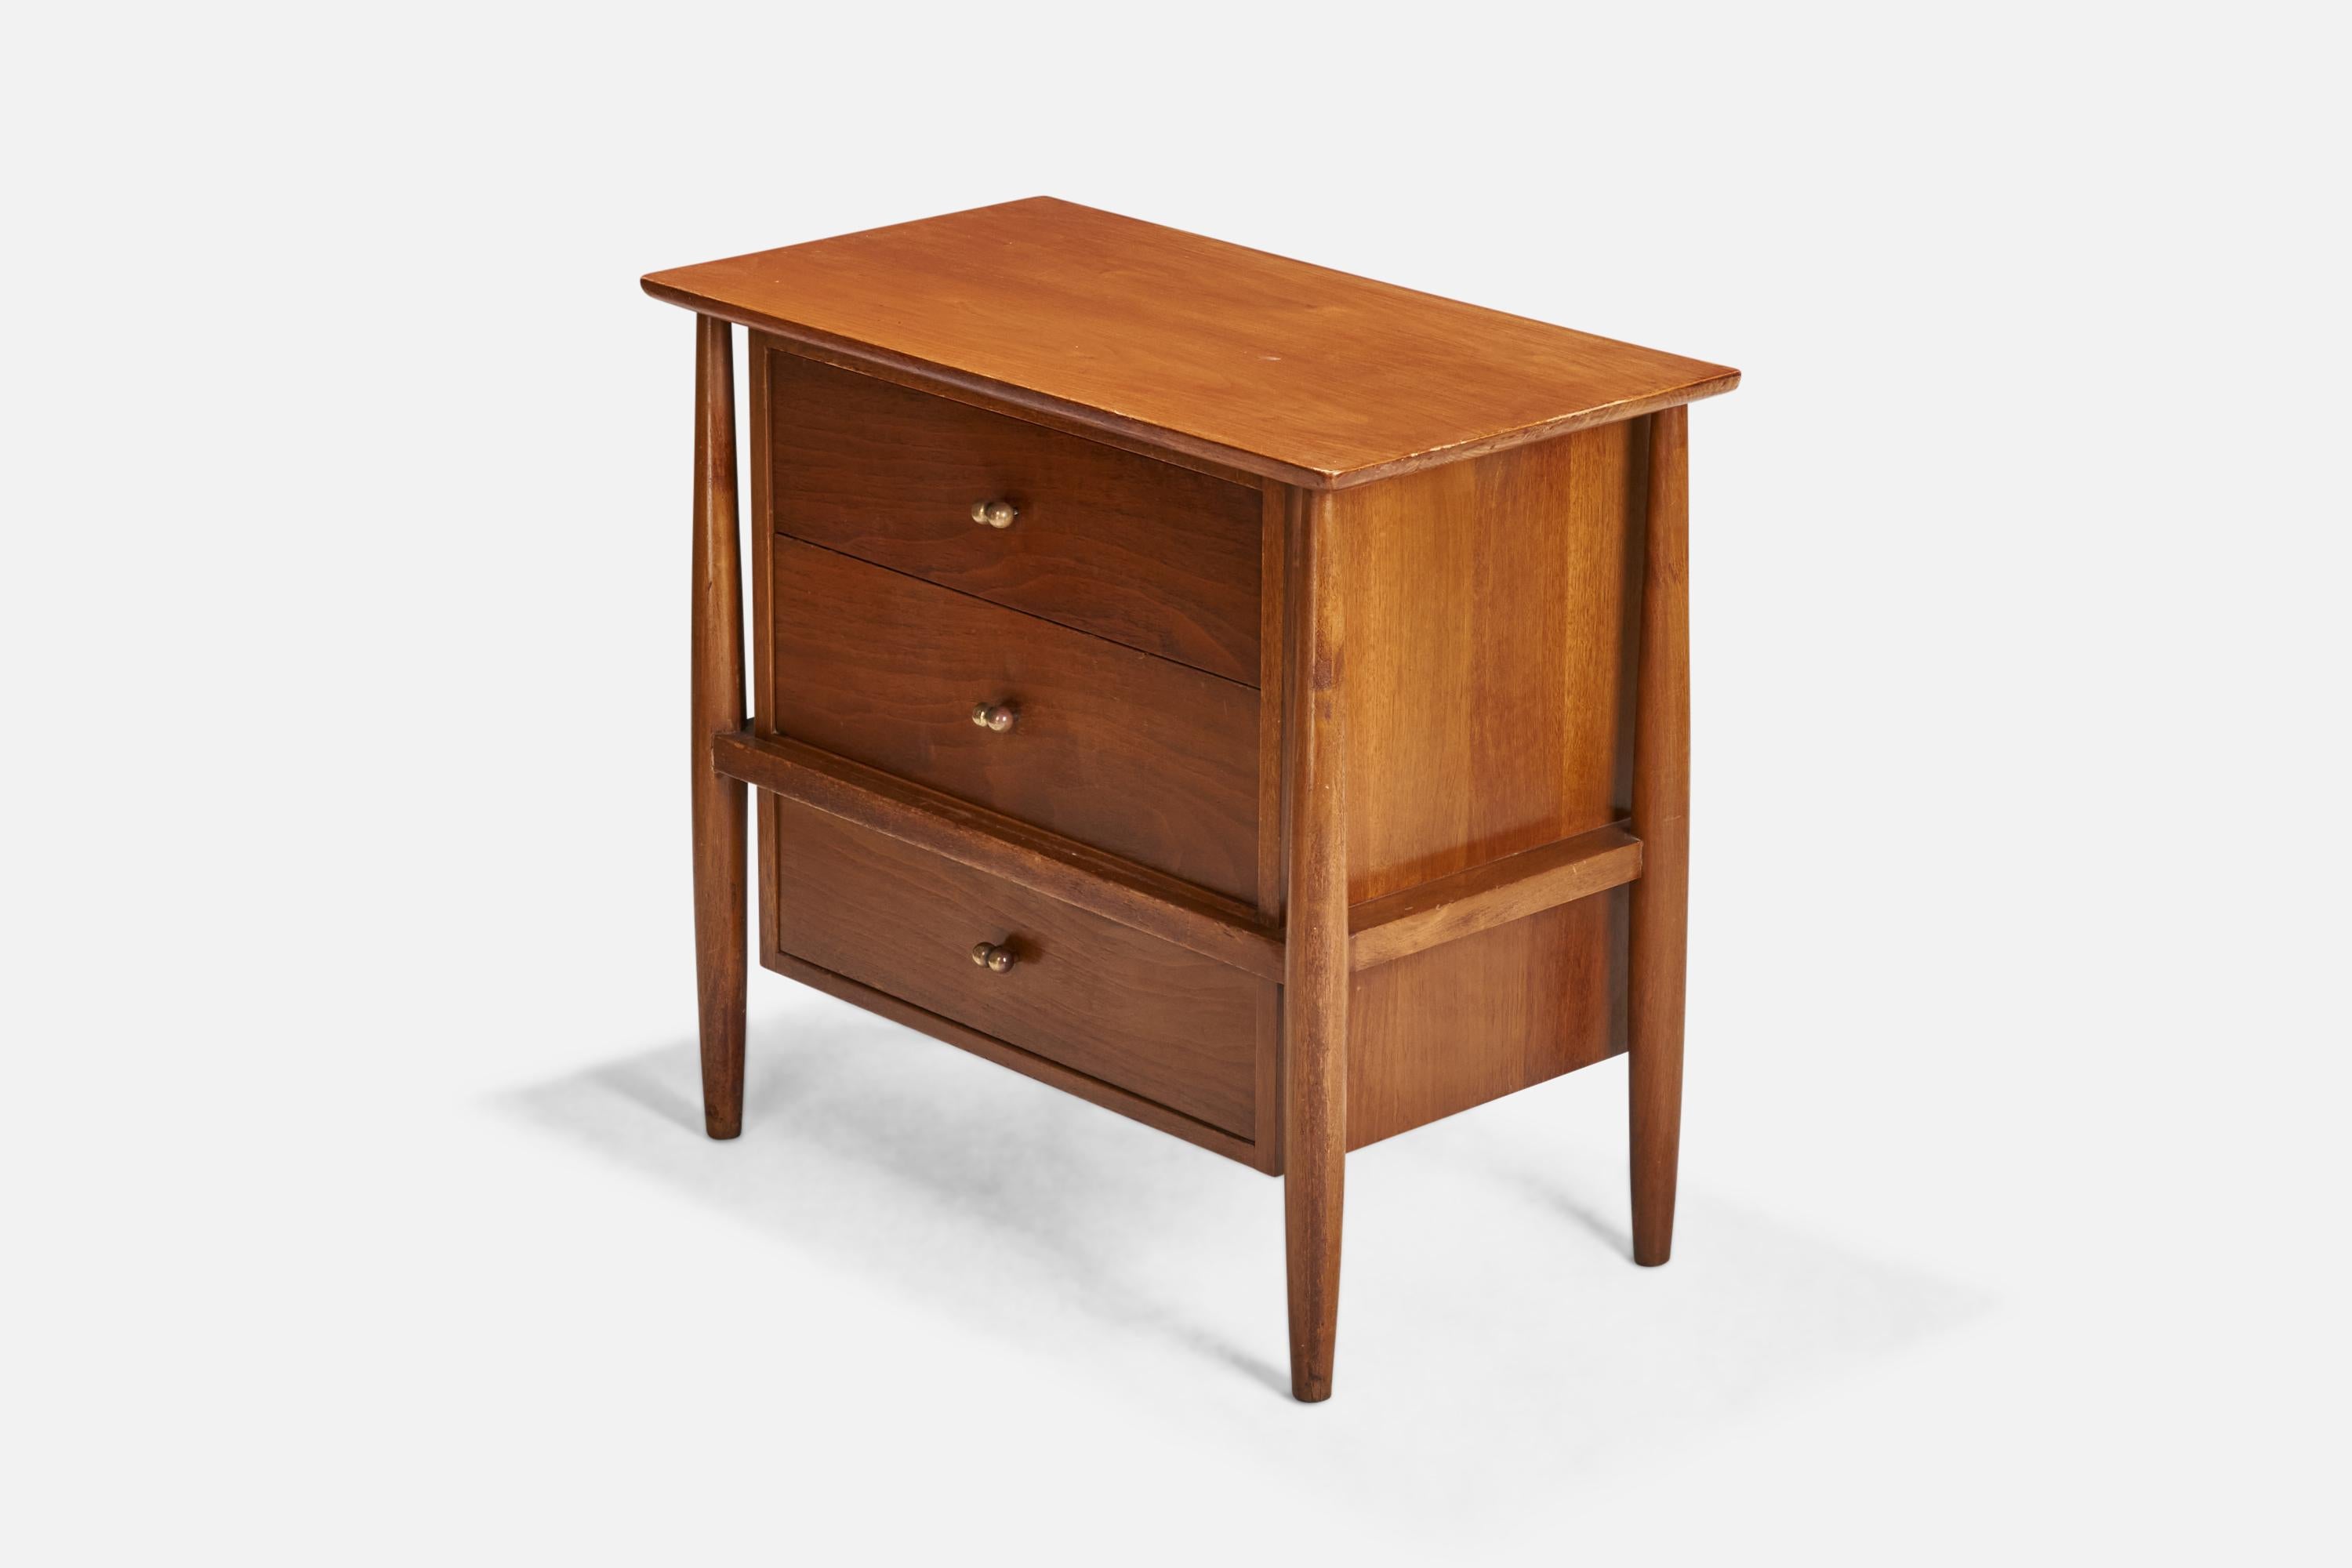 A pair of walnut and brass night stand designed and produced by Mount Airy, USA, 1950s.